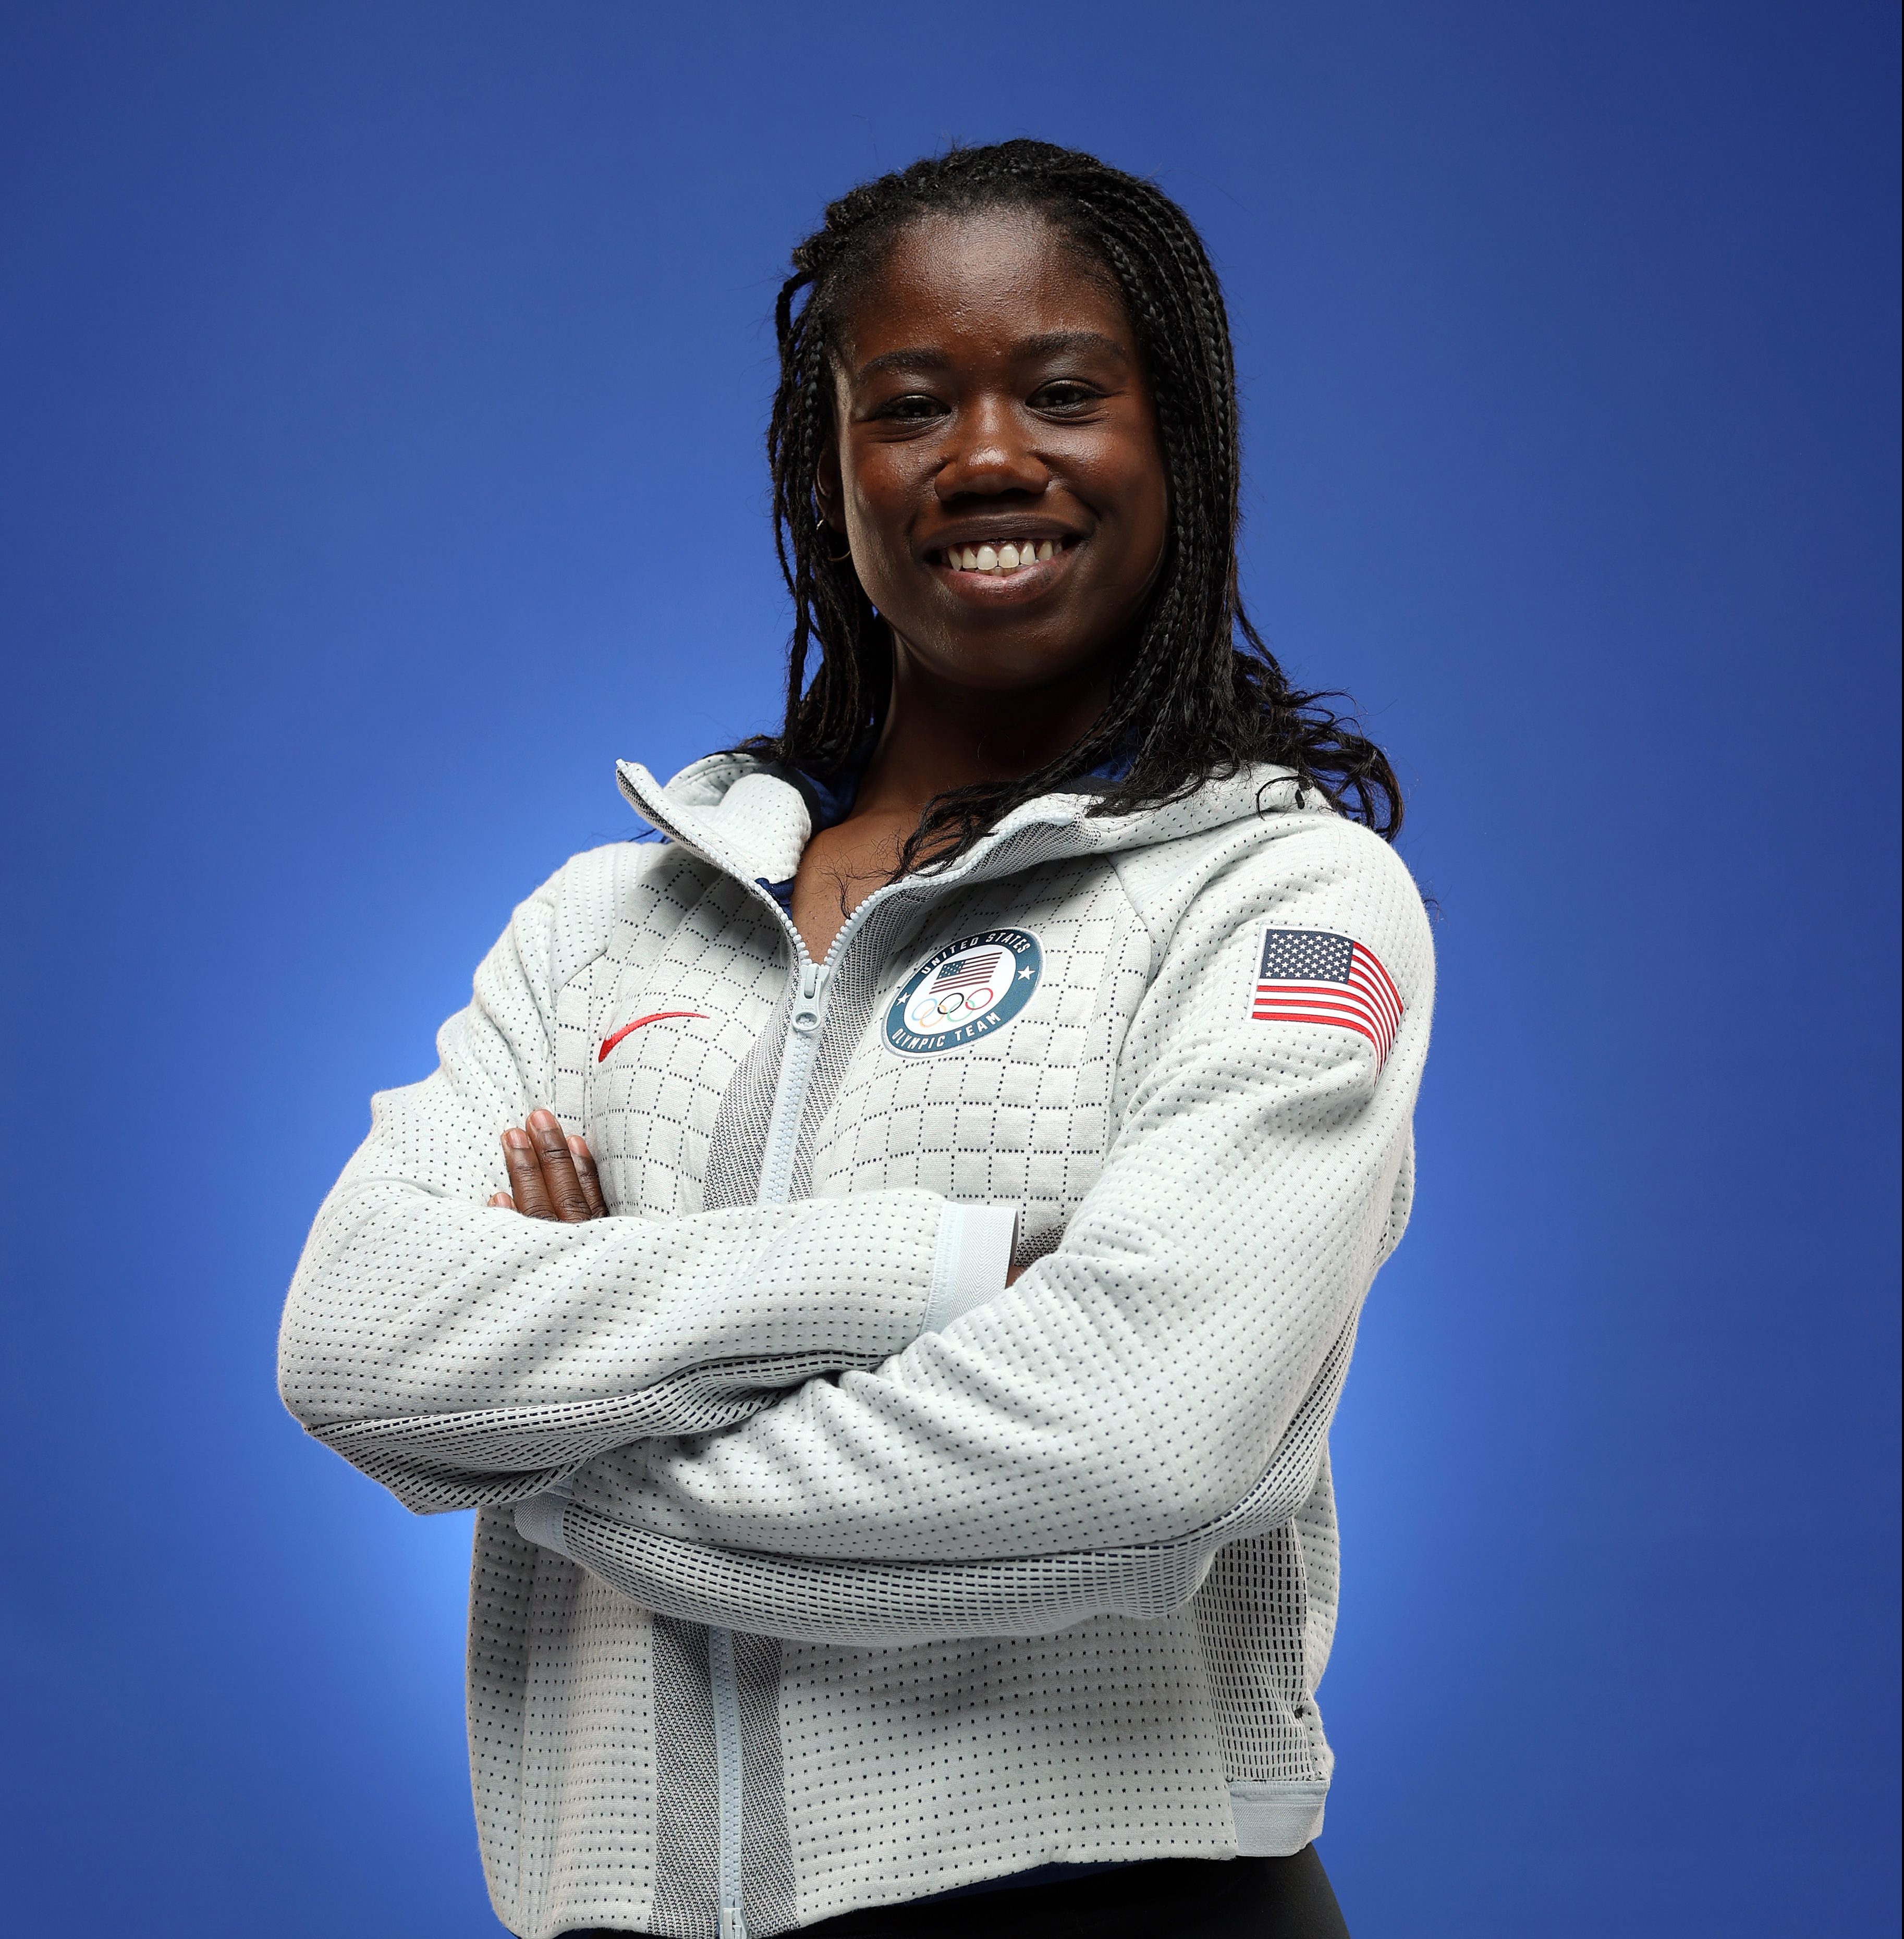 Erin Jackson becomes the first Black woman to win a medal in speed skating. She won her gold medal 500 meter race on Sunday.